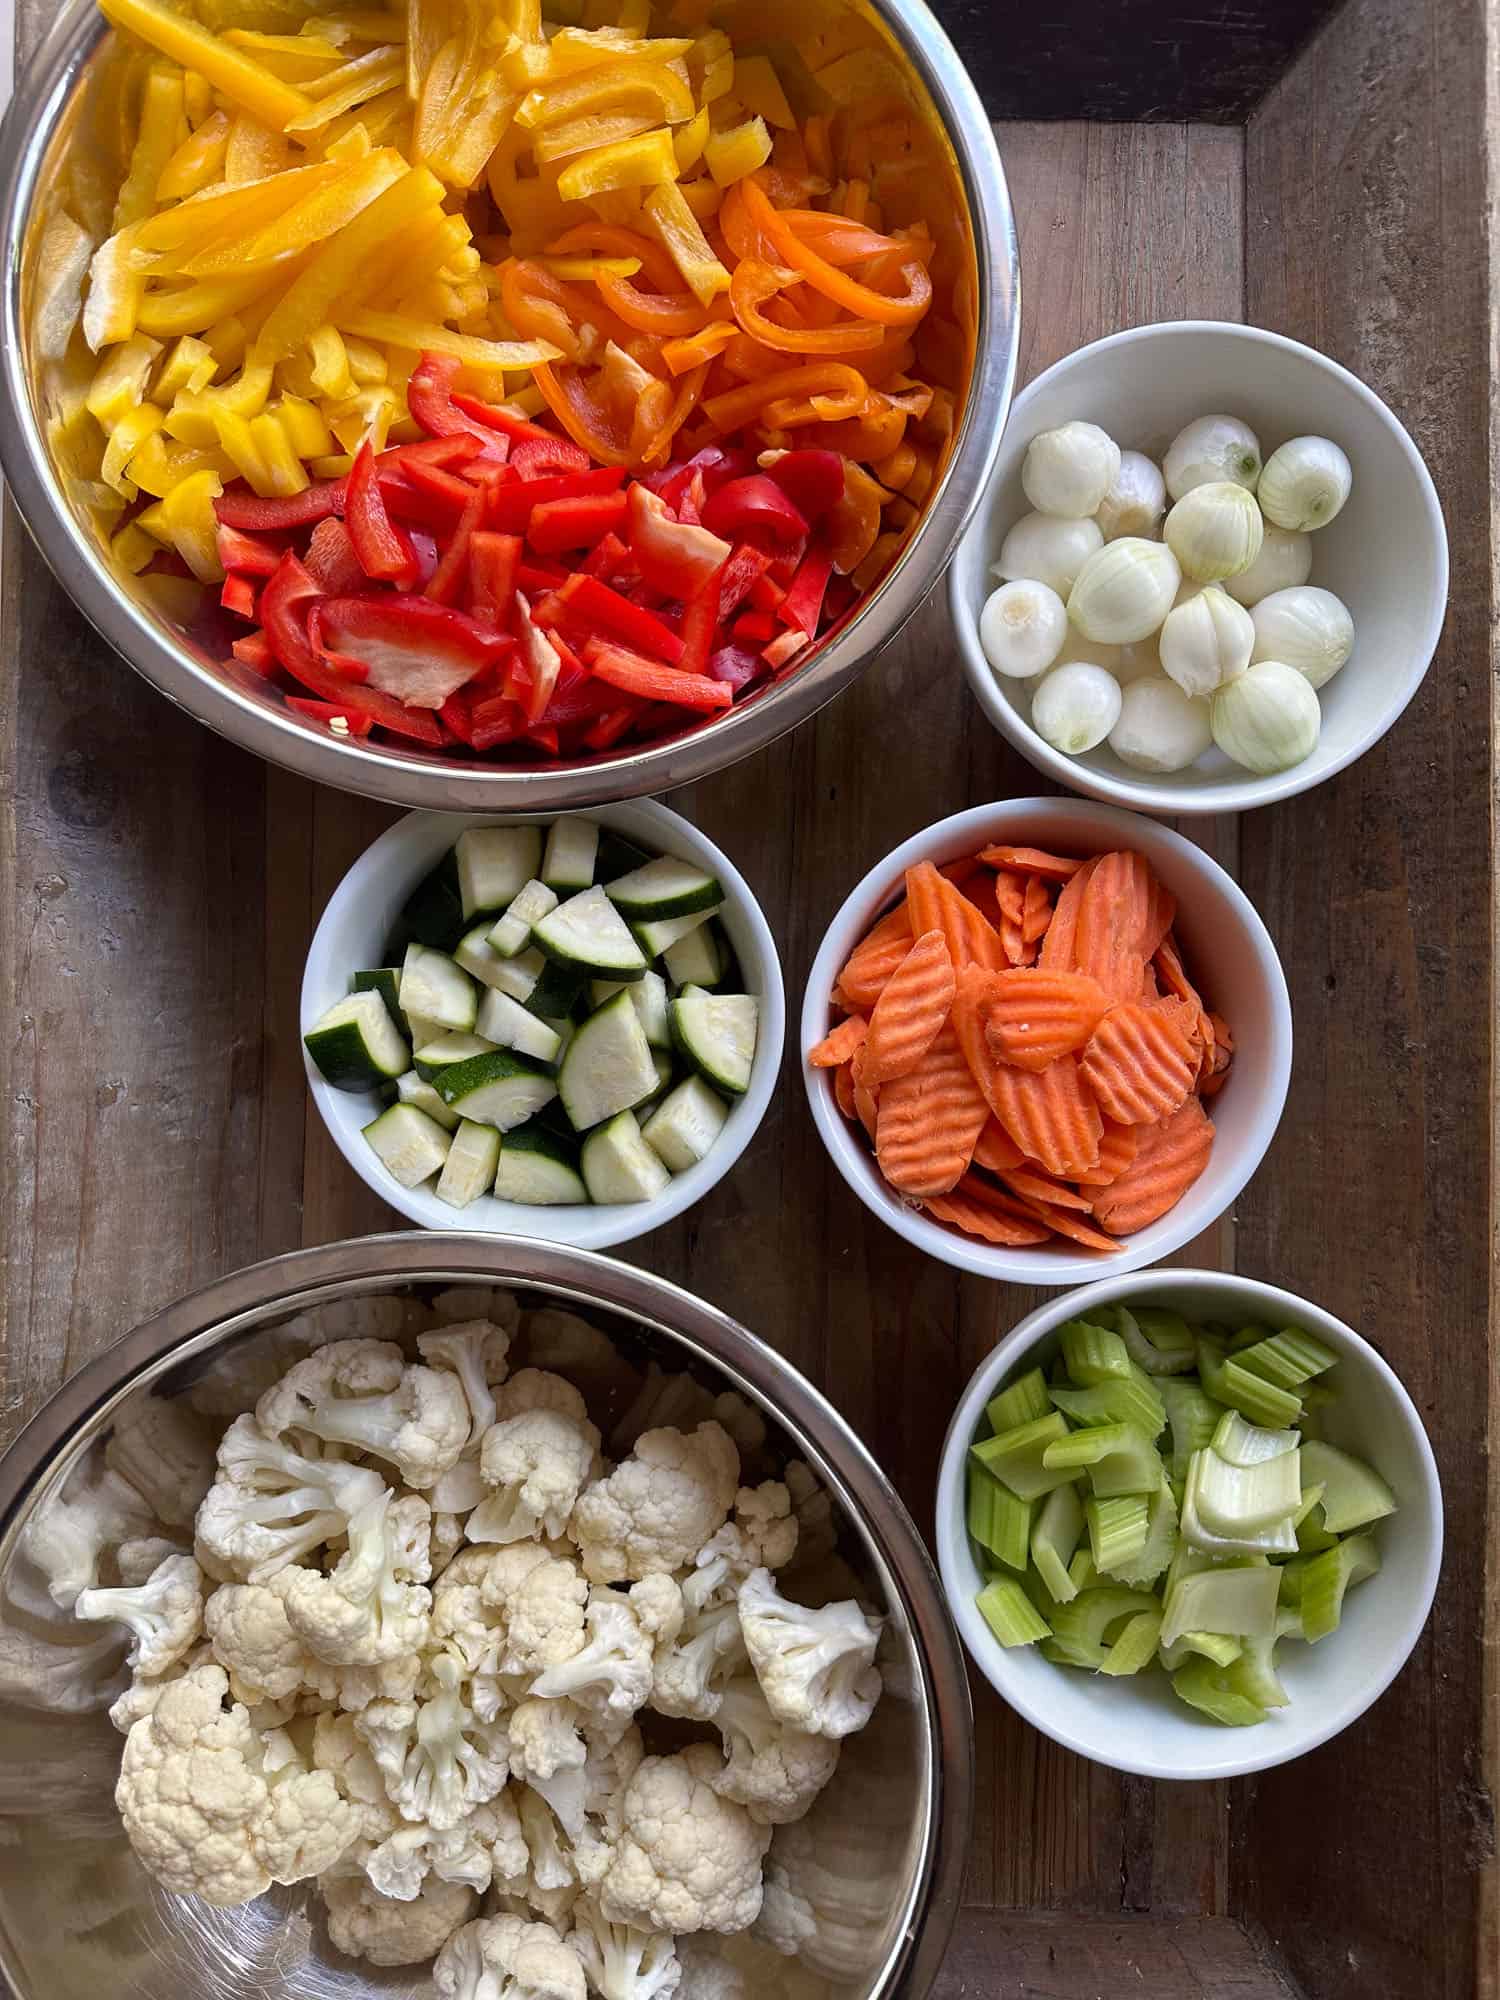 cut and washed vegetables for making jardinera